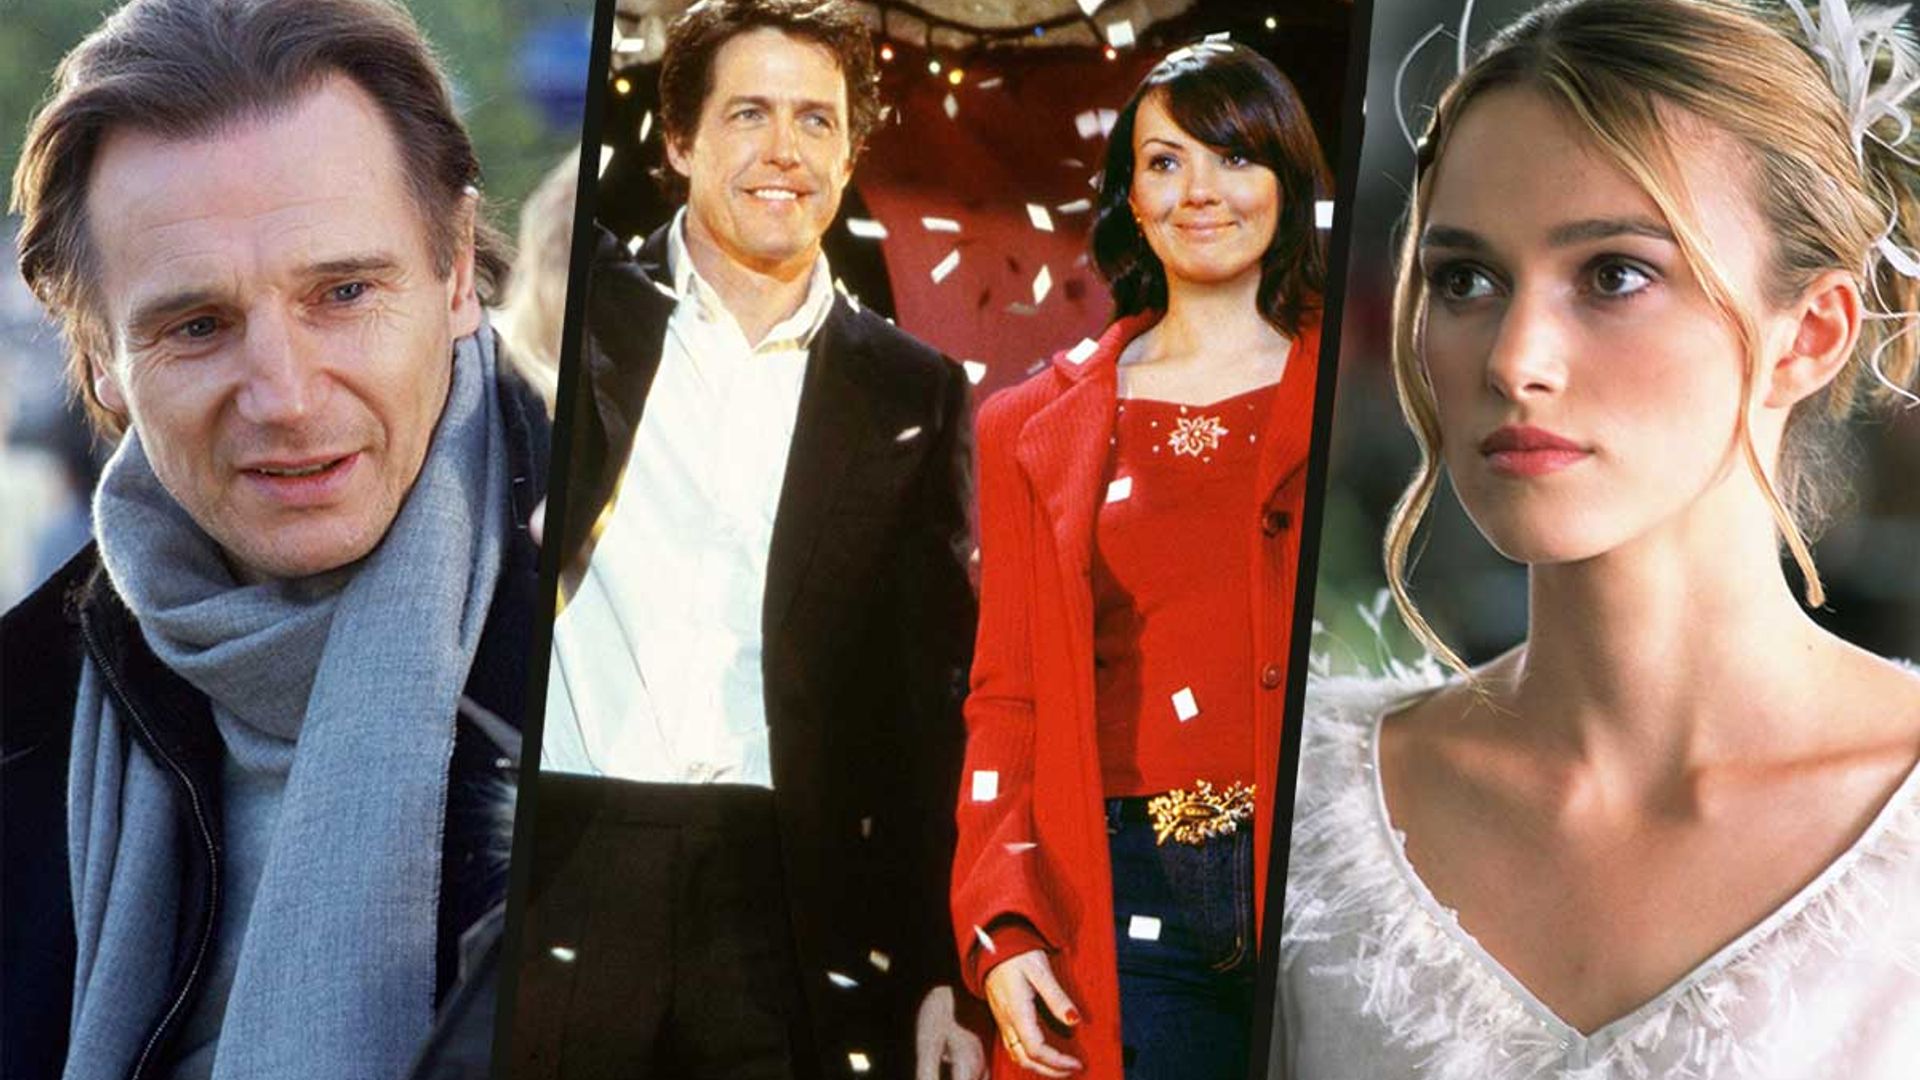 11 Love Actually-inspired gifts that fans will adore this Christmas